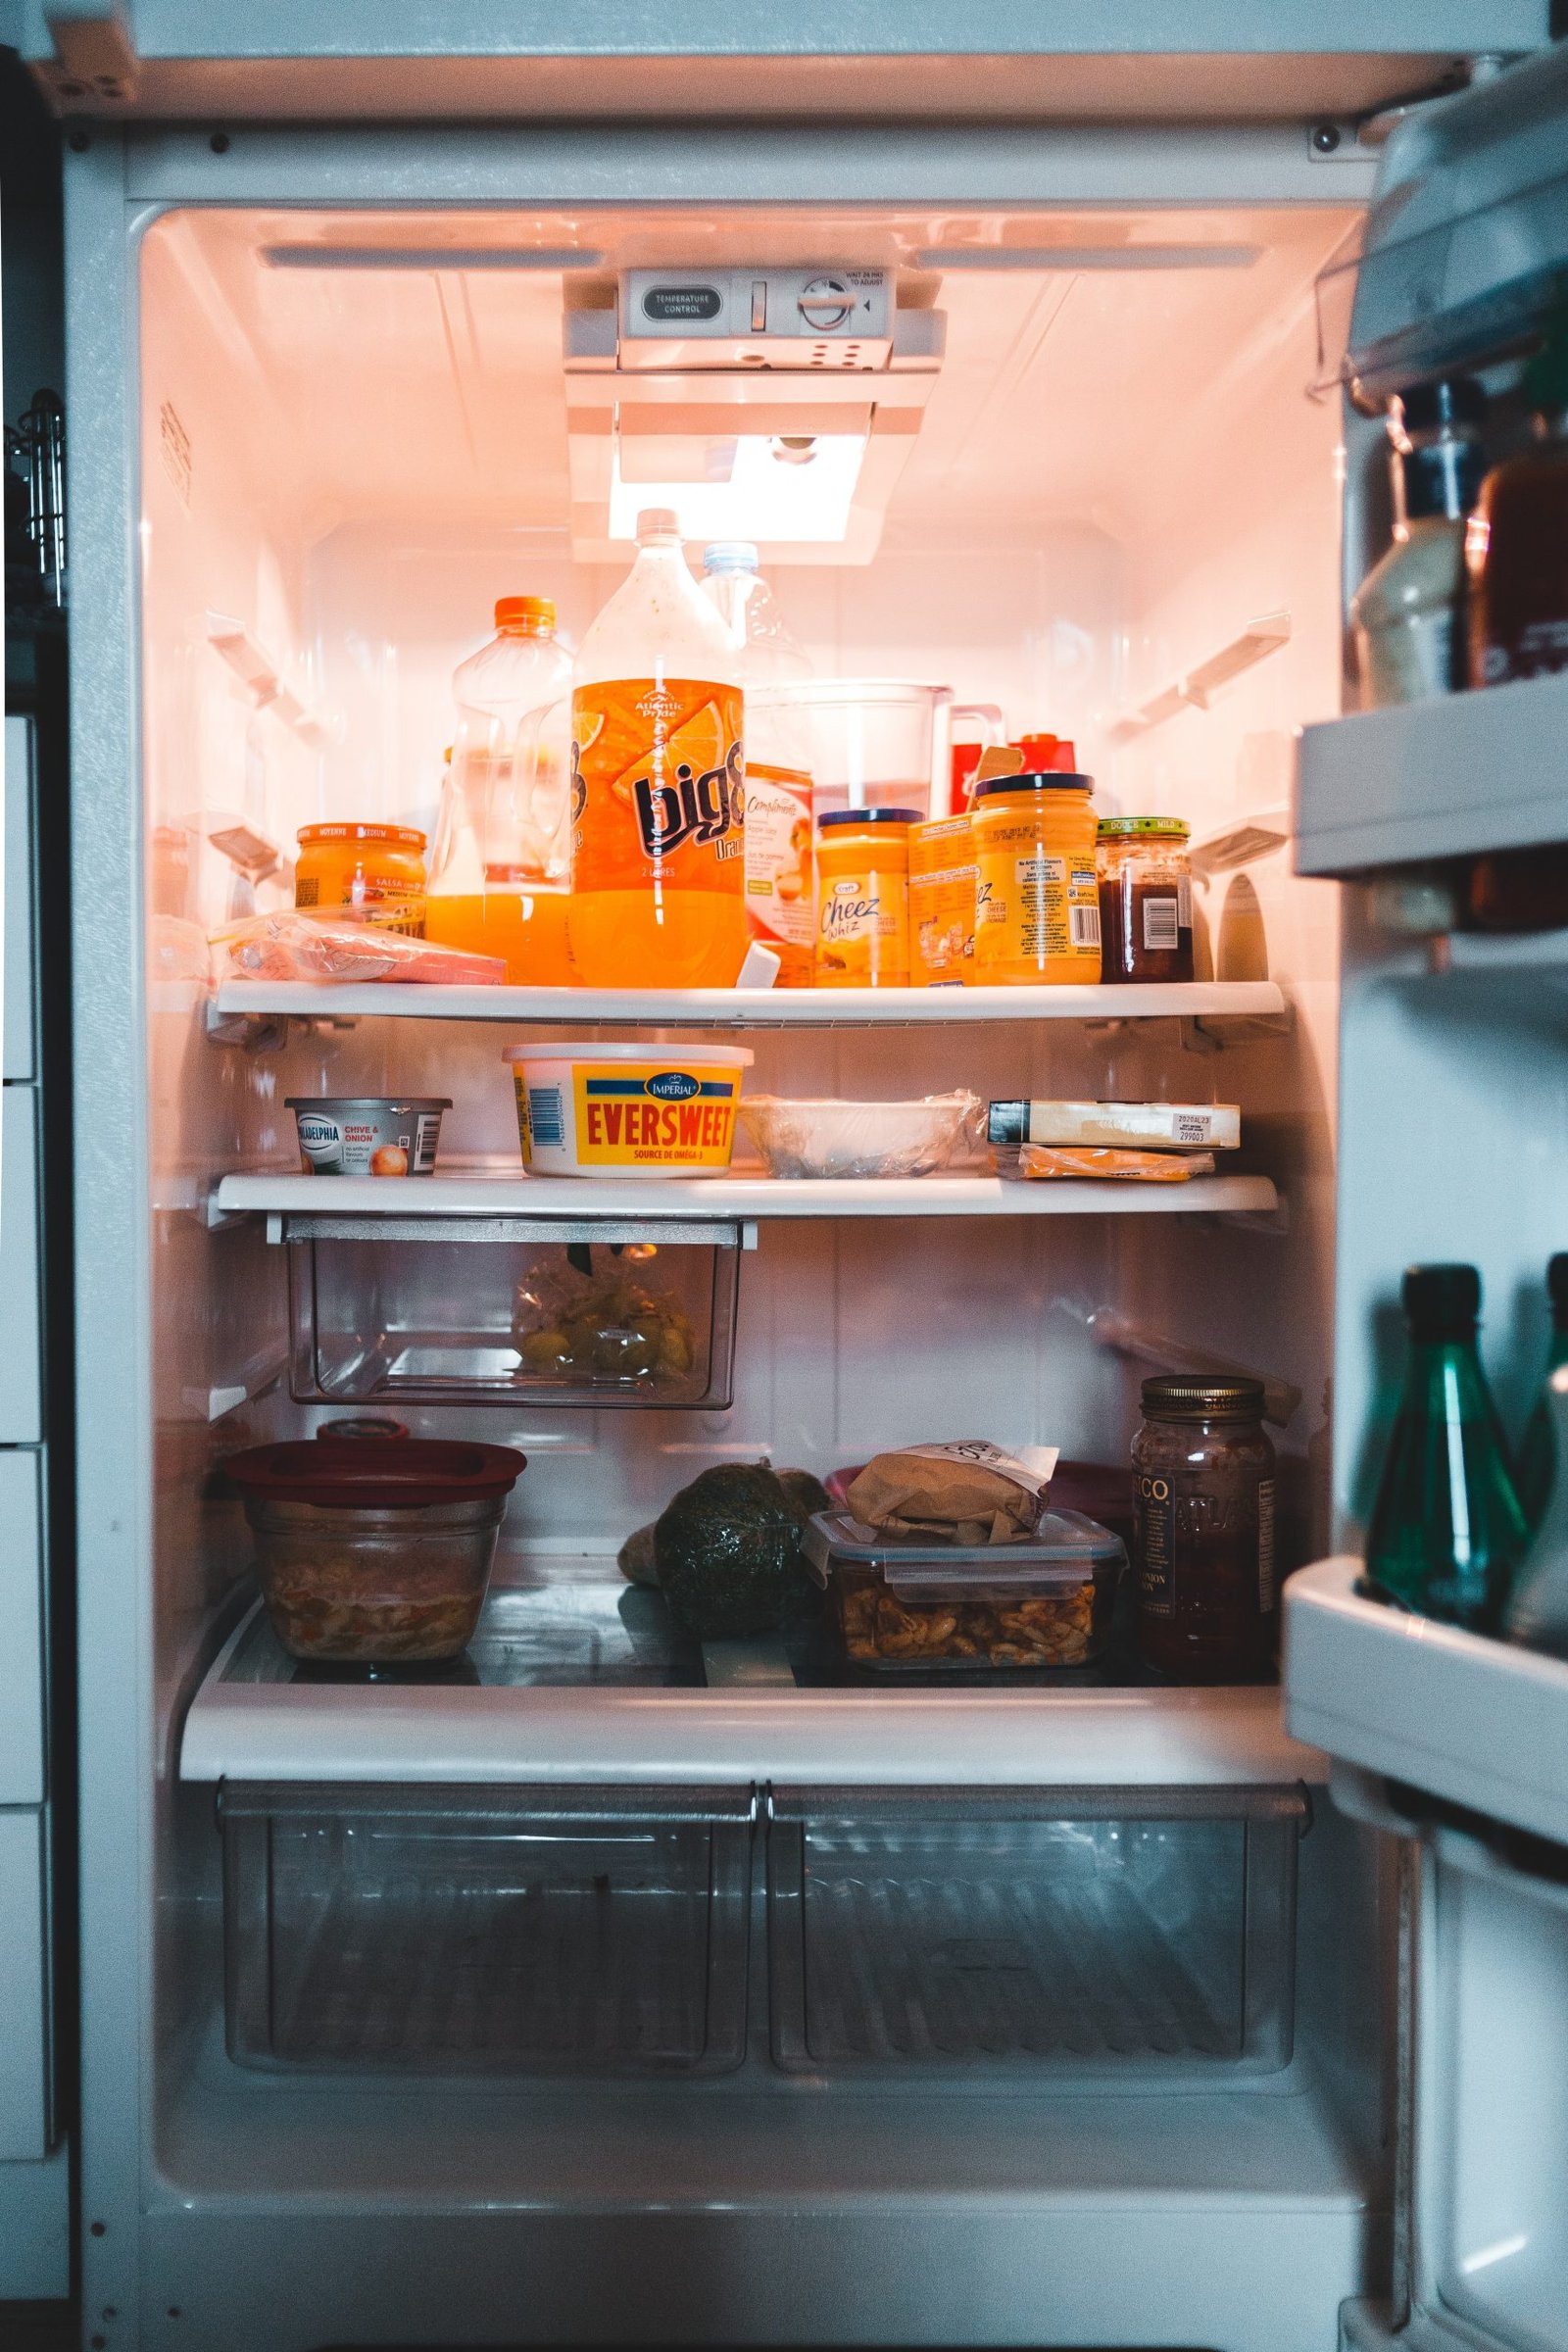 Three Significant Hints For Purchasing Refrigerator